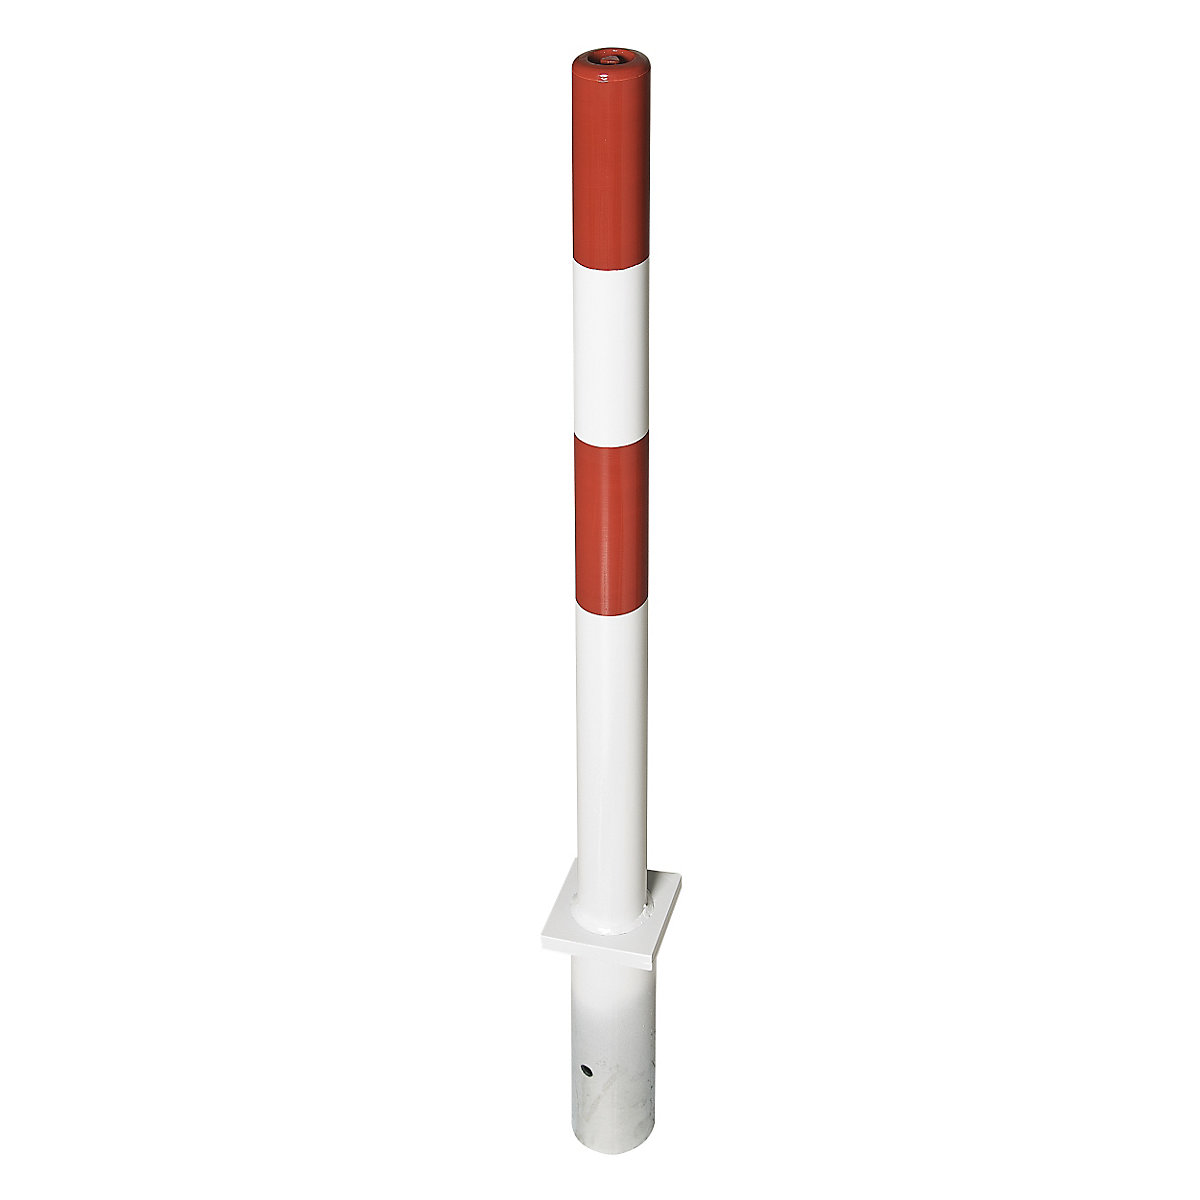 Barrier post made of steel, for setting in concrete, Ø 60 mm, red/white, 2 chain eyelets-7